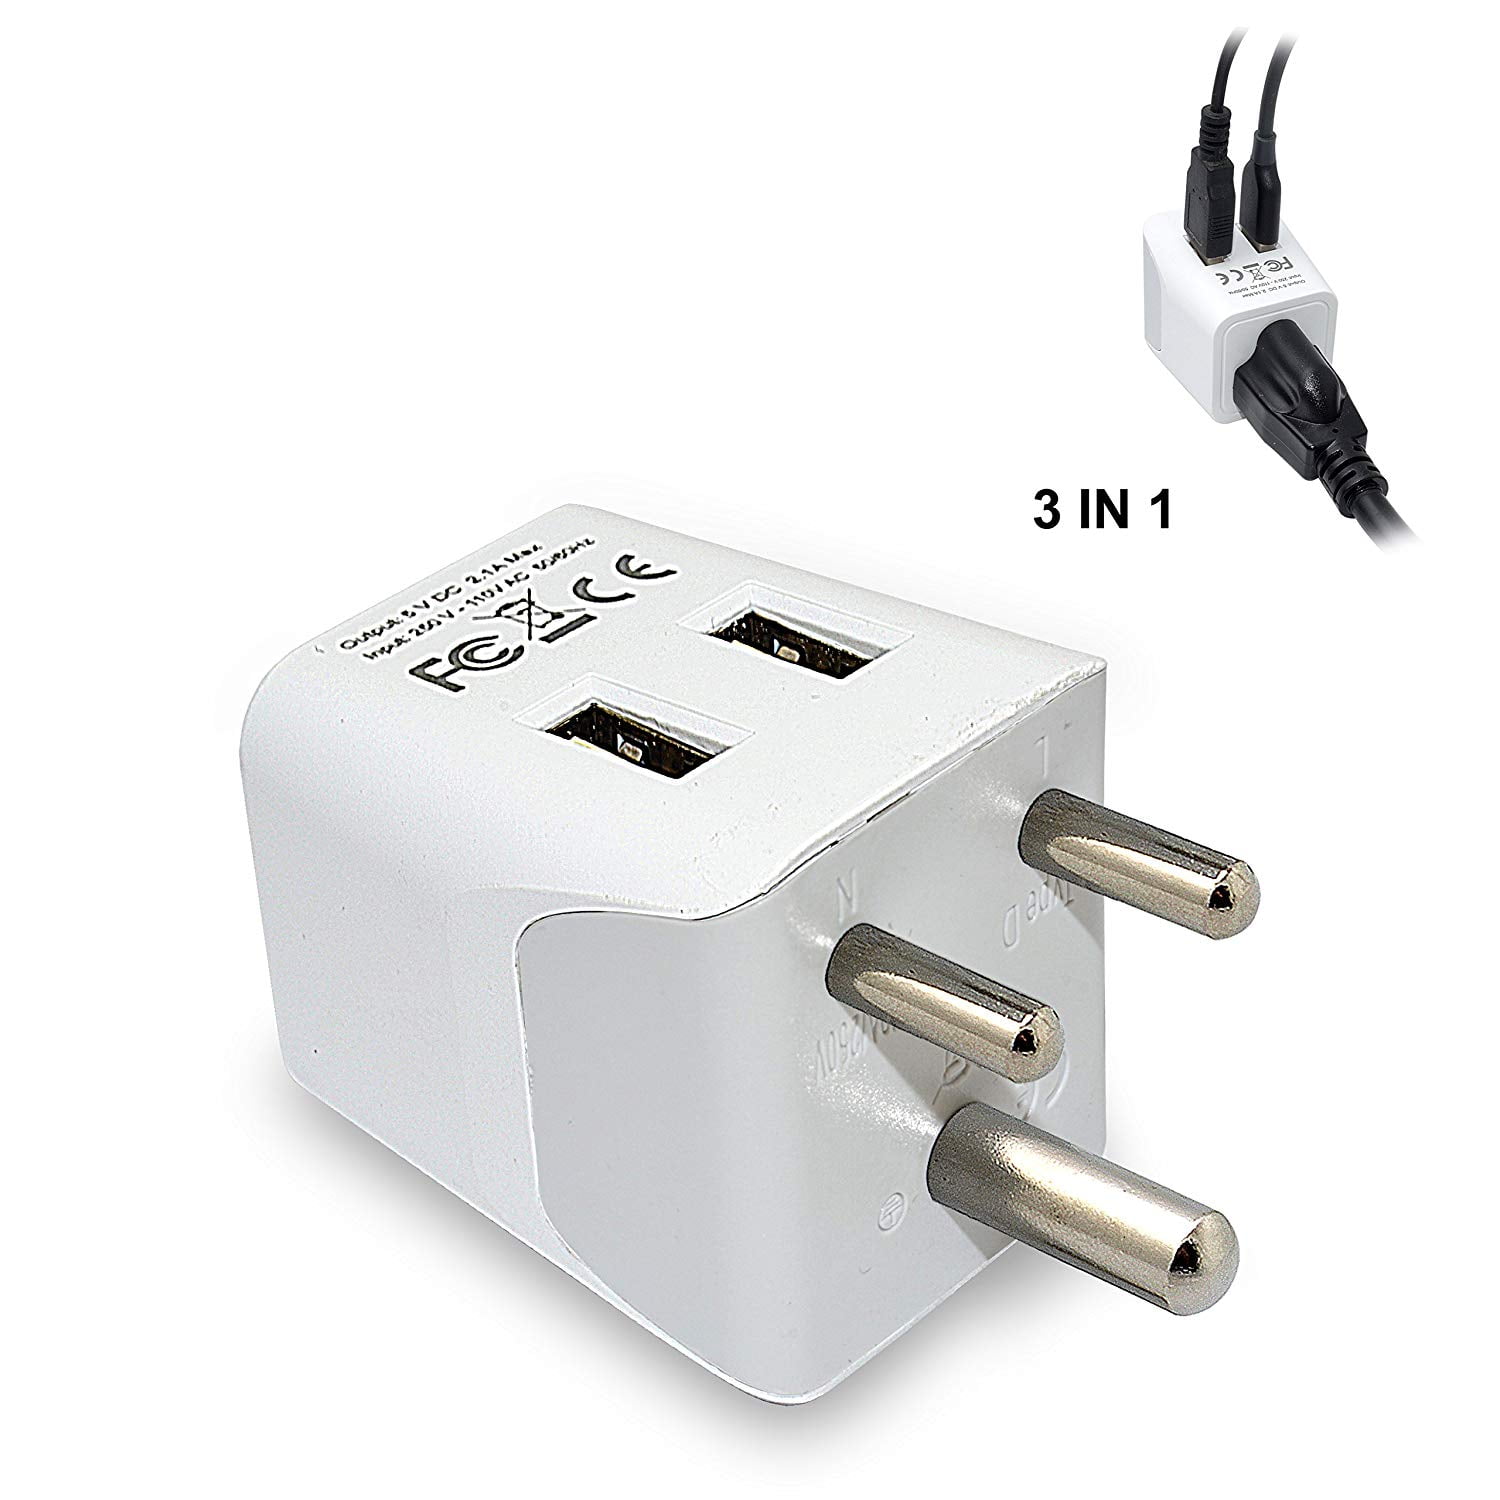 travel adaptor for india